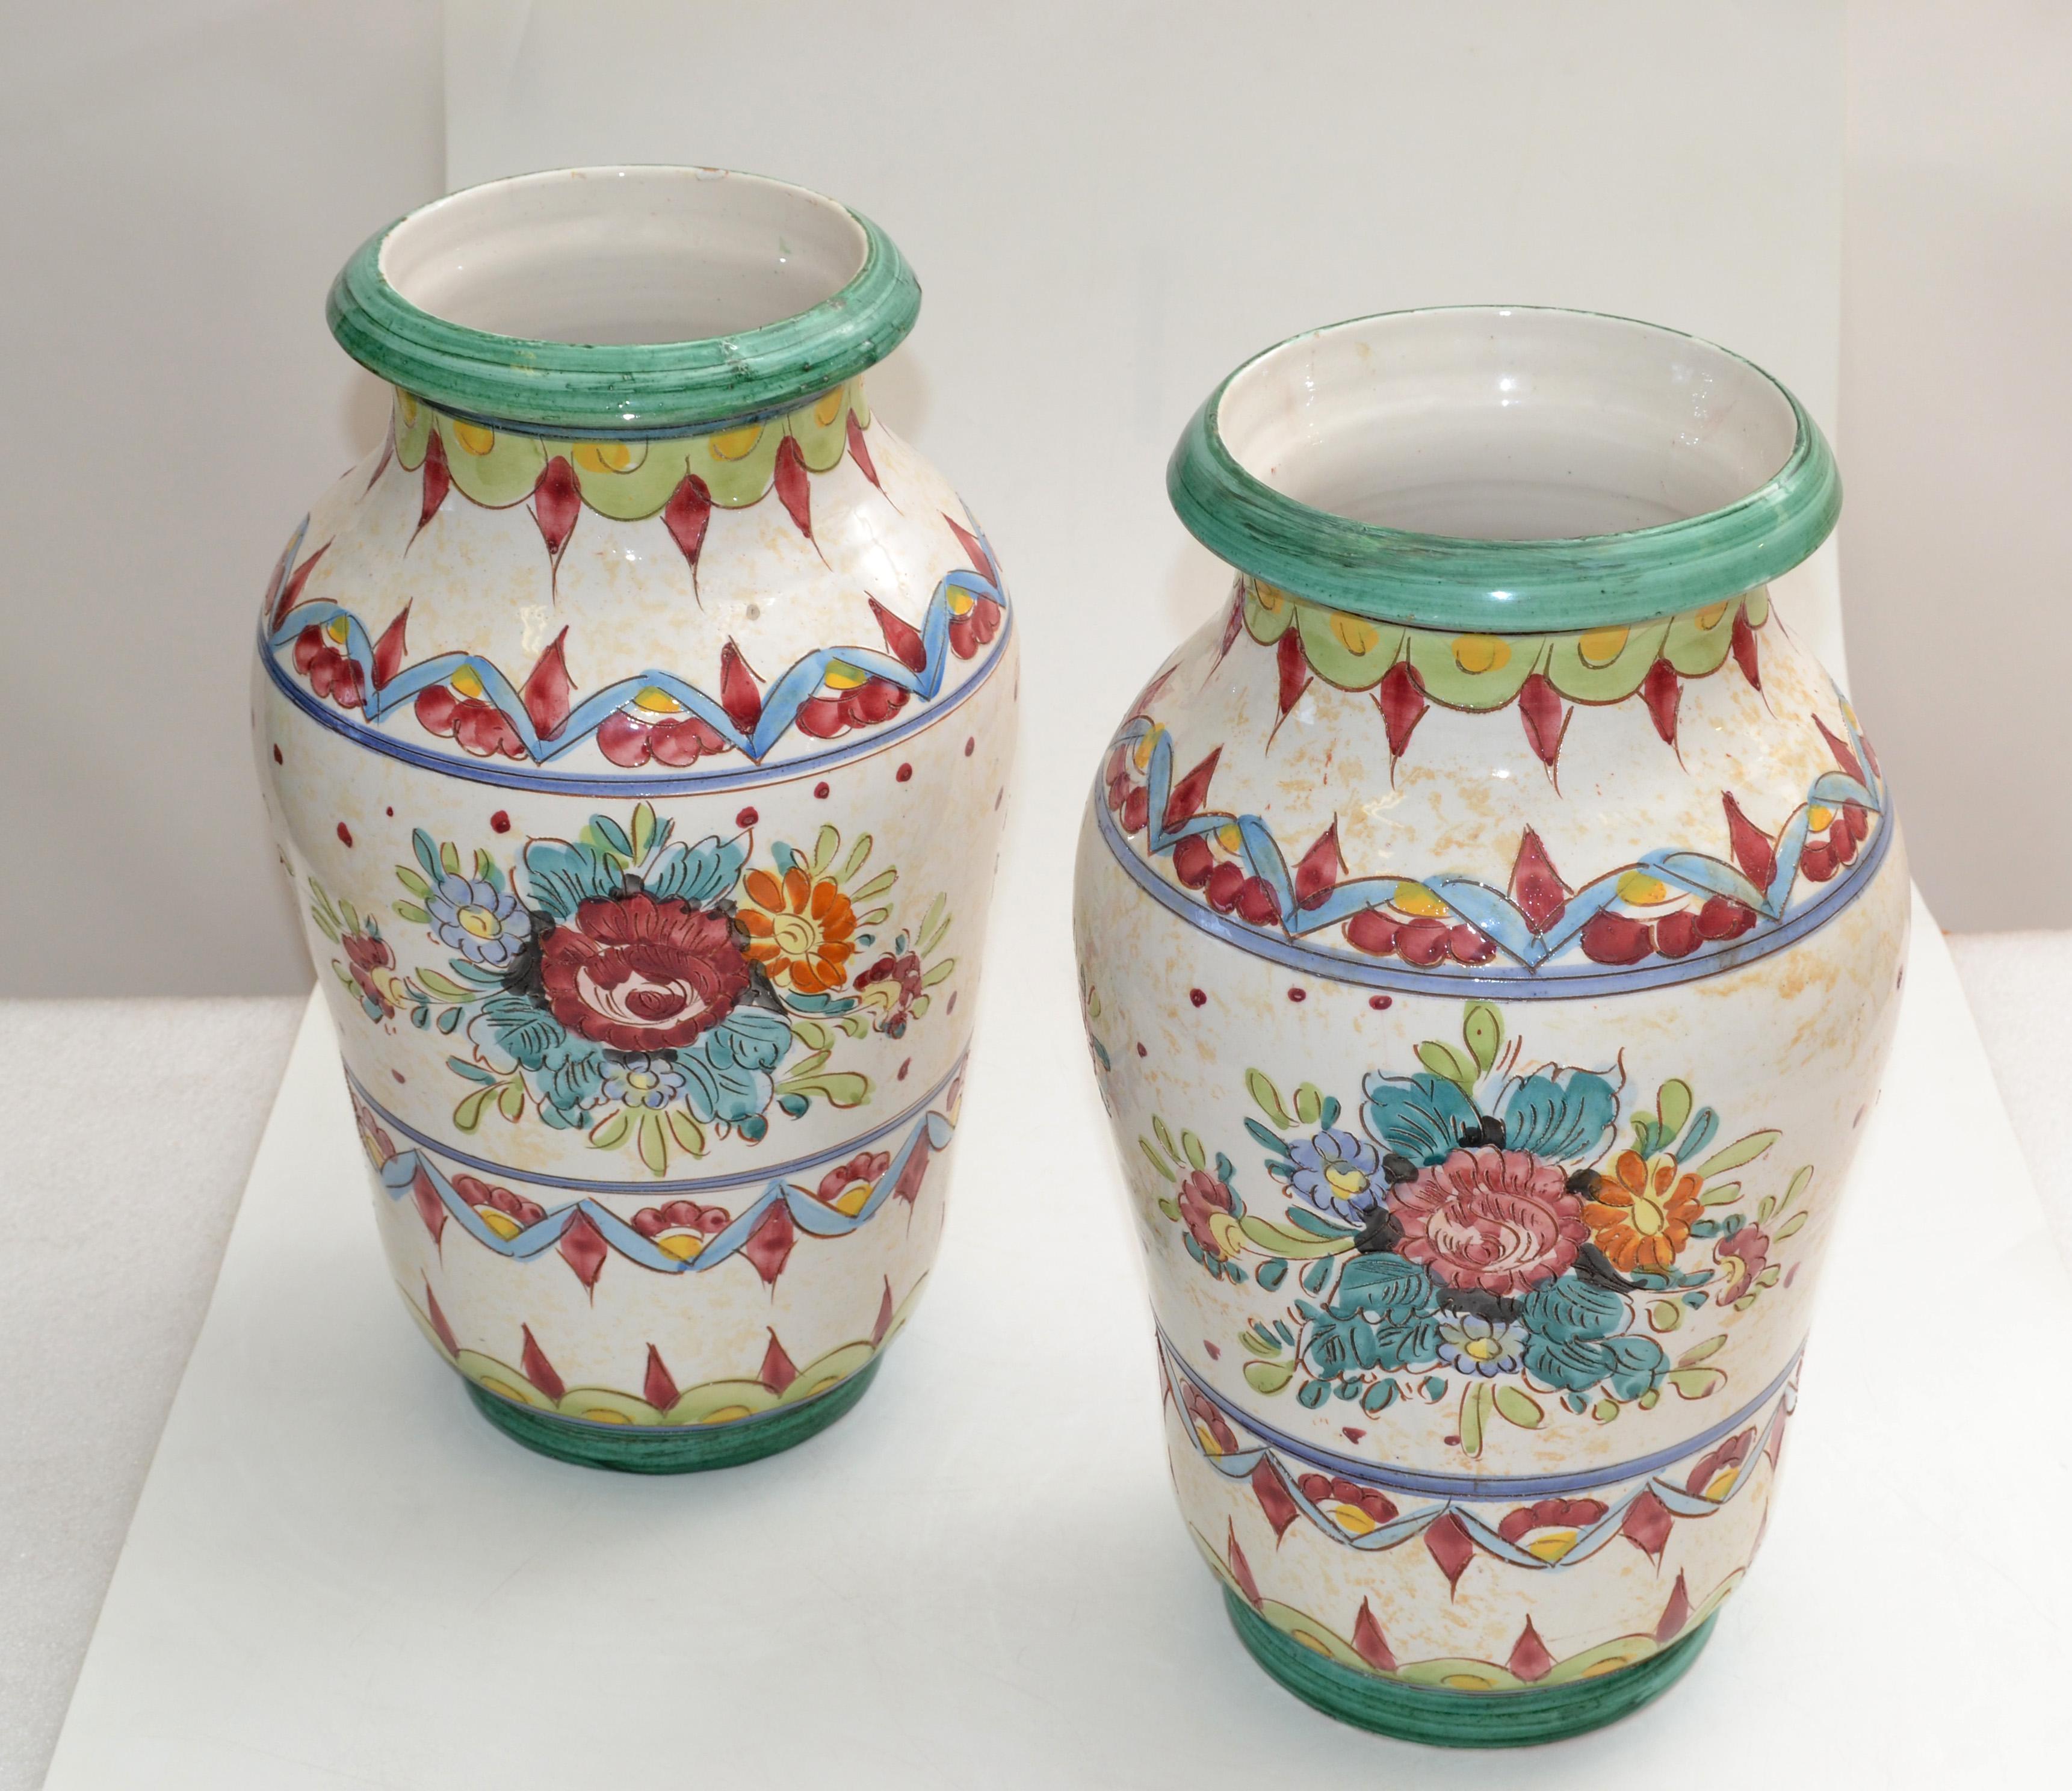 Set of 2 Italian handcrafted and hand painted Deruta style ceramic vases in white and mint foundation and bordeaux / blue flower motif.
The outside and inside is glazed.
The opening of the Vases are 5.75 inches & 6.5 inches.
Both are marked Italy